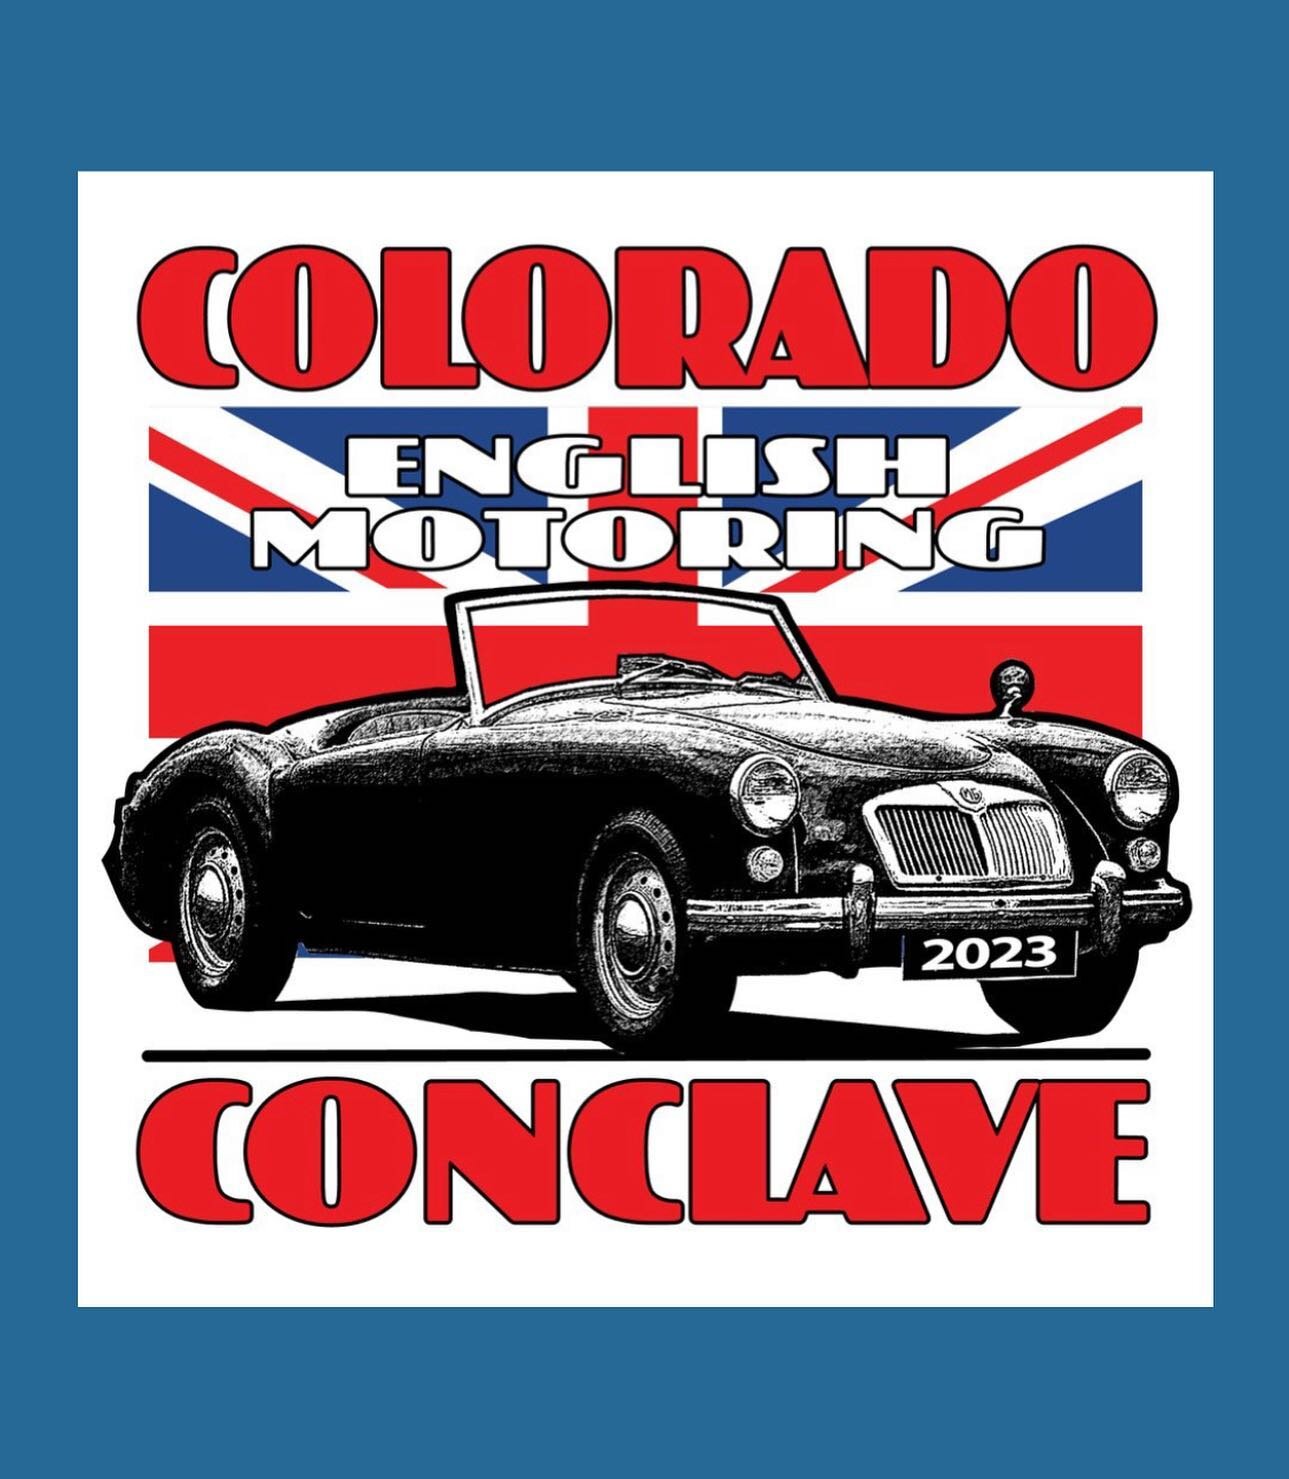 Join the crew at the Colorado English Motoring Conclave this weekend, Saturday and Sunday, for a drive and a car show!